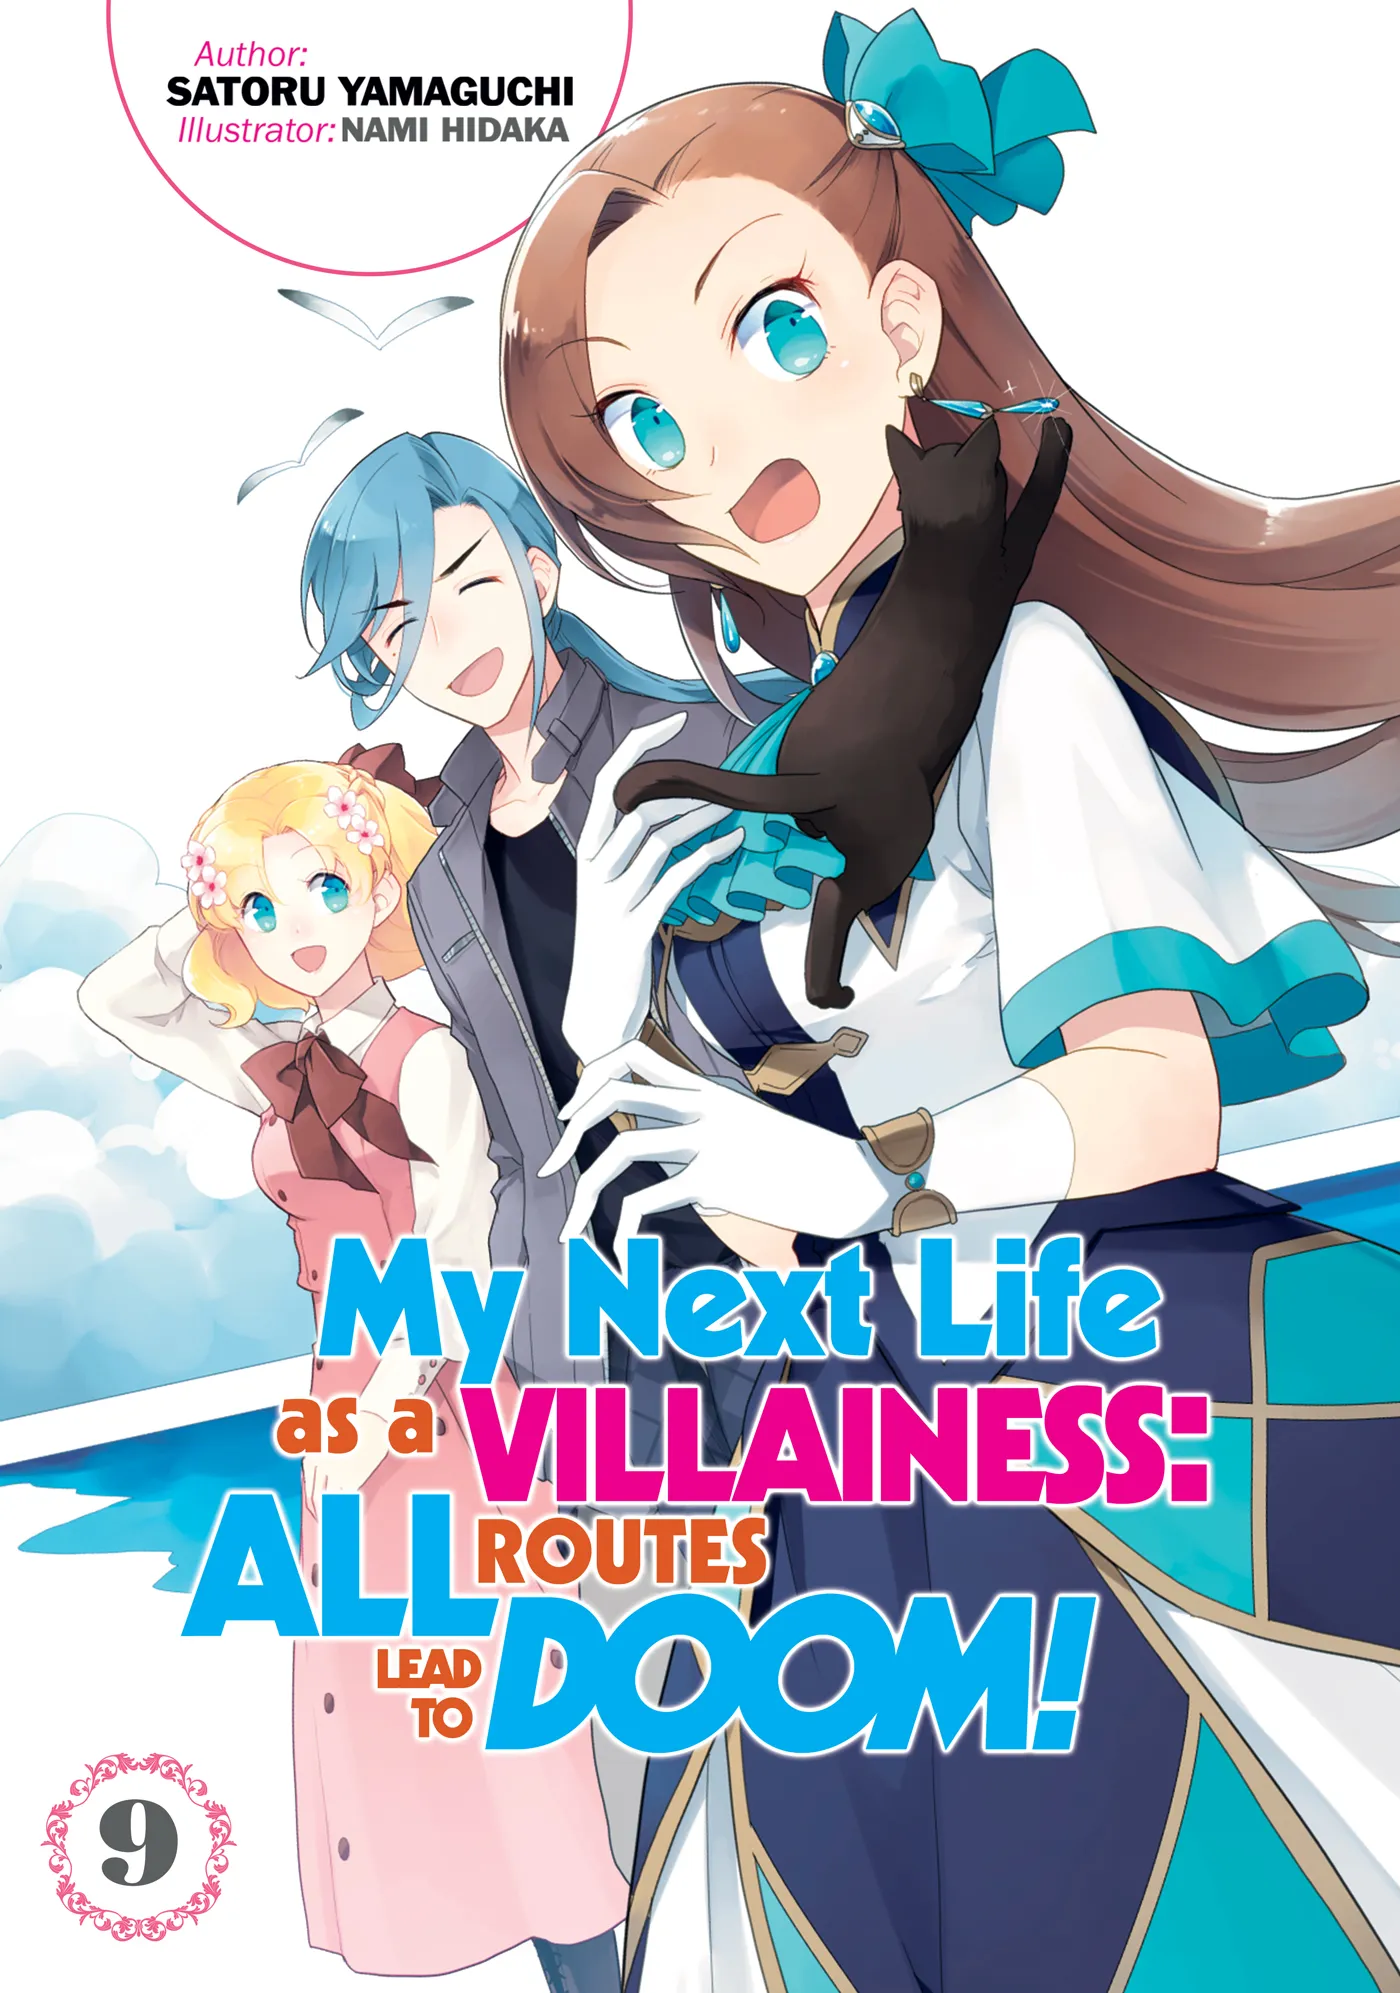 My Next Life as a Villainess: All Routes Lead to Doom! Volume 9 (My Next Life as a Villainess: All Routes Lead to Doom! #9)